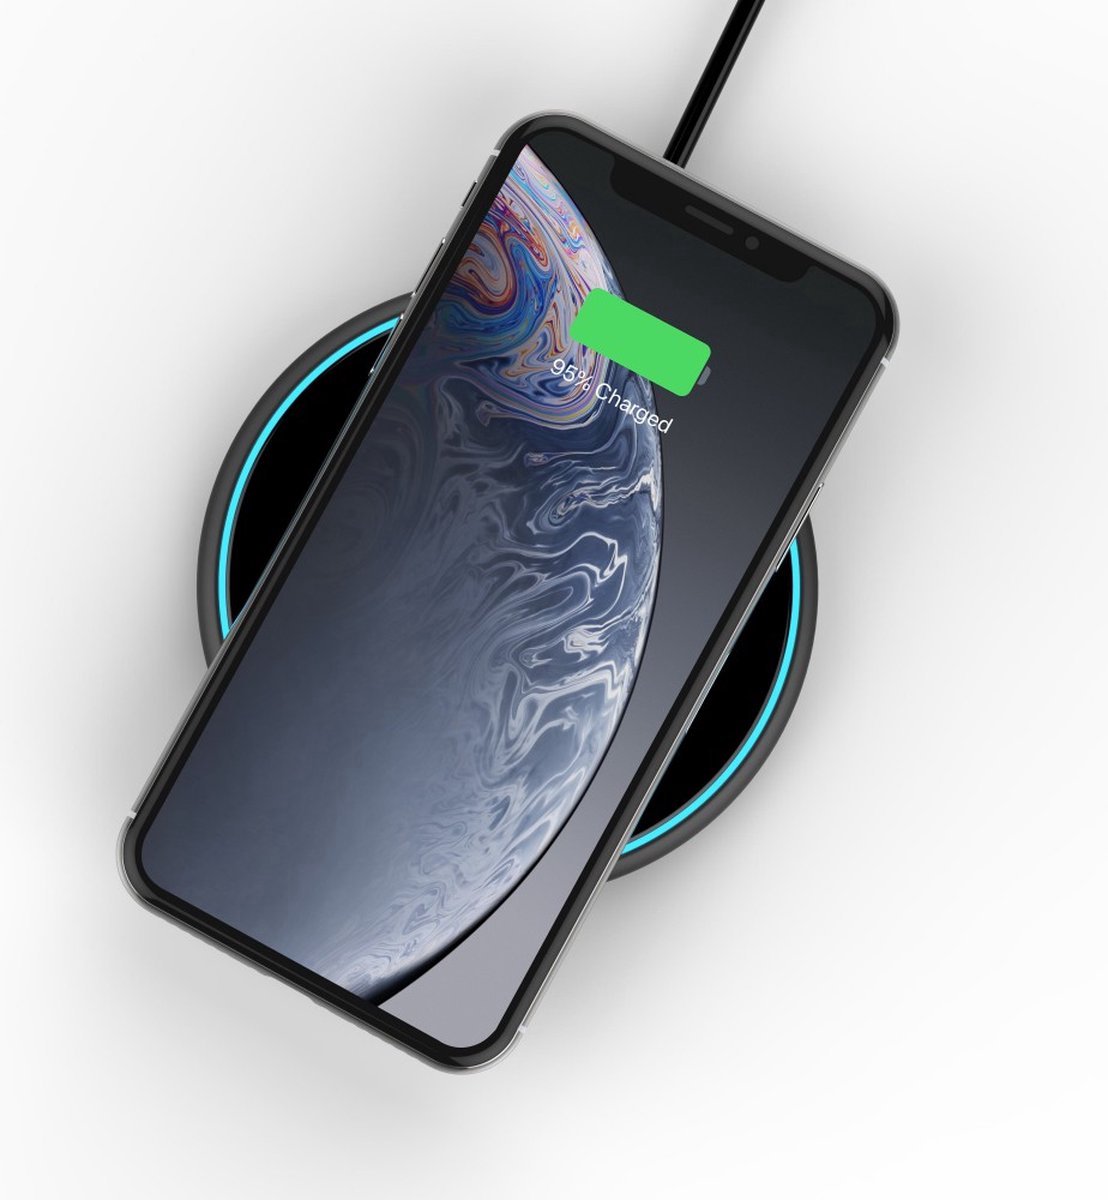 Durata - FAST WIRELESS CHARGER - draadloze oplader - for Iphone, Samsung and wireless smartphones - DRWC102